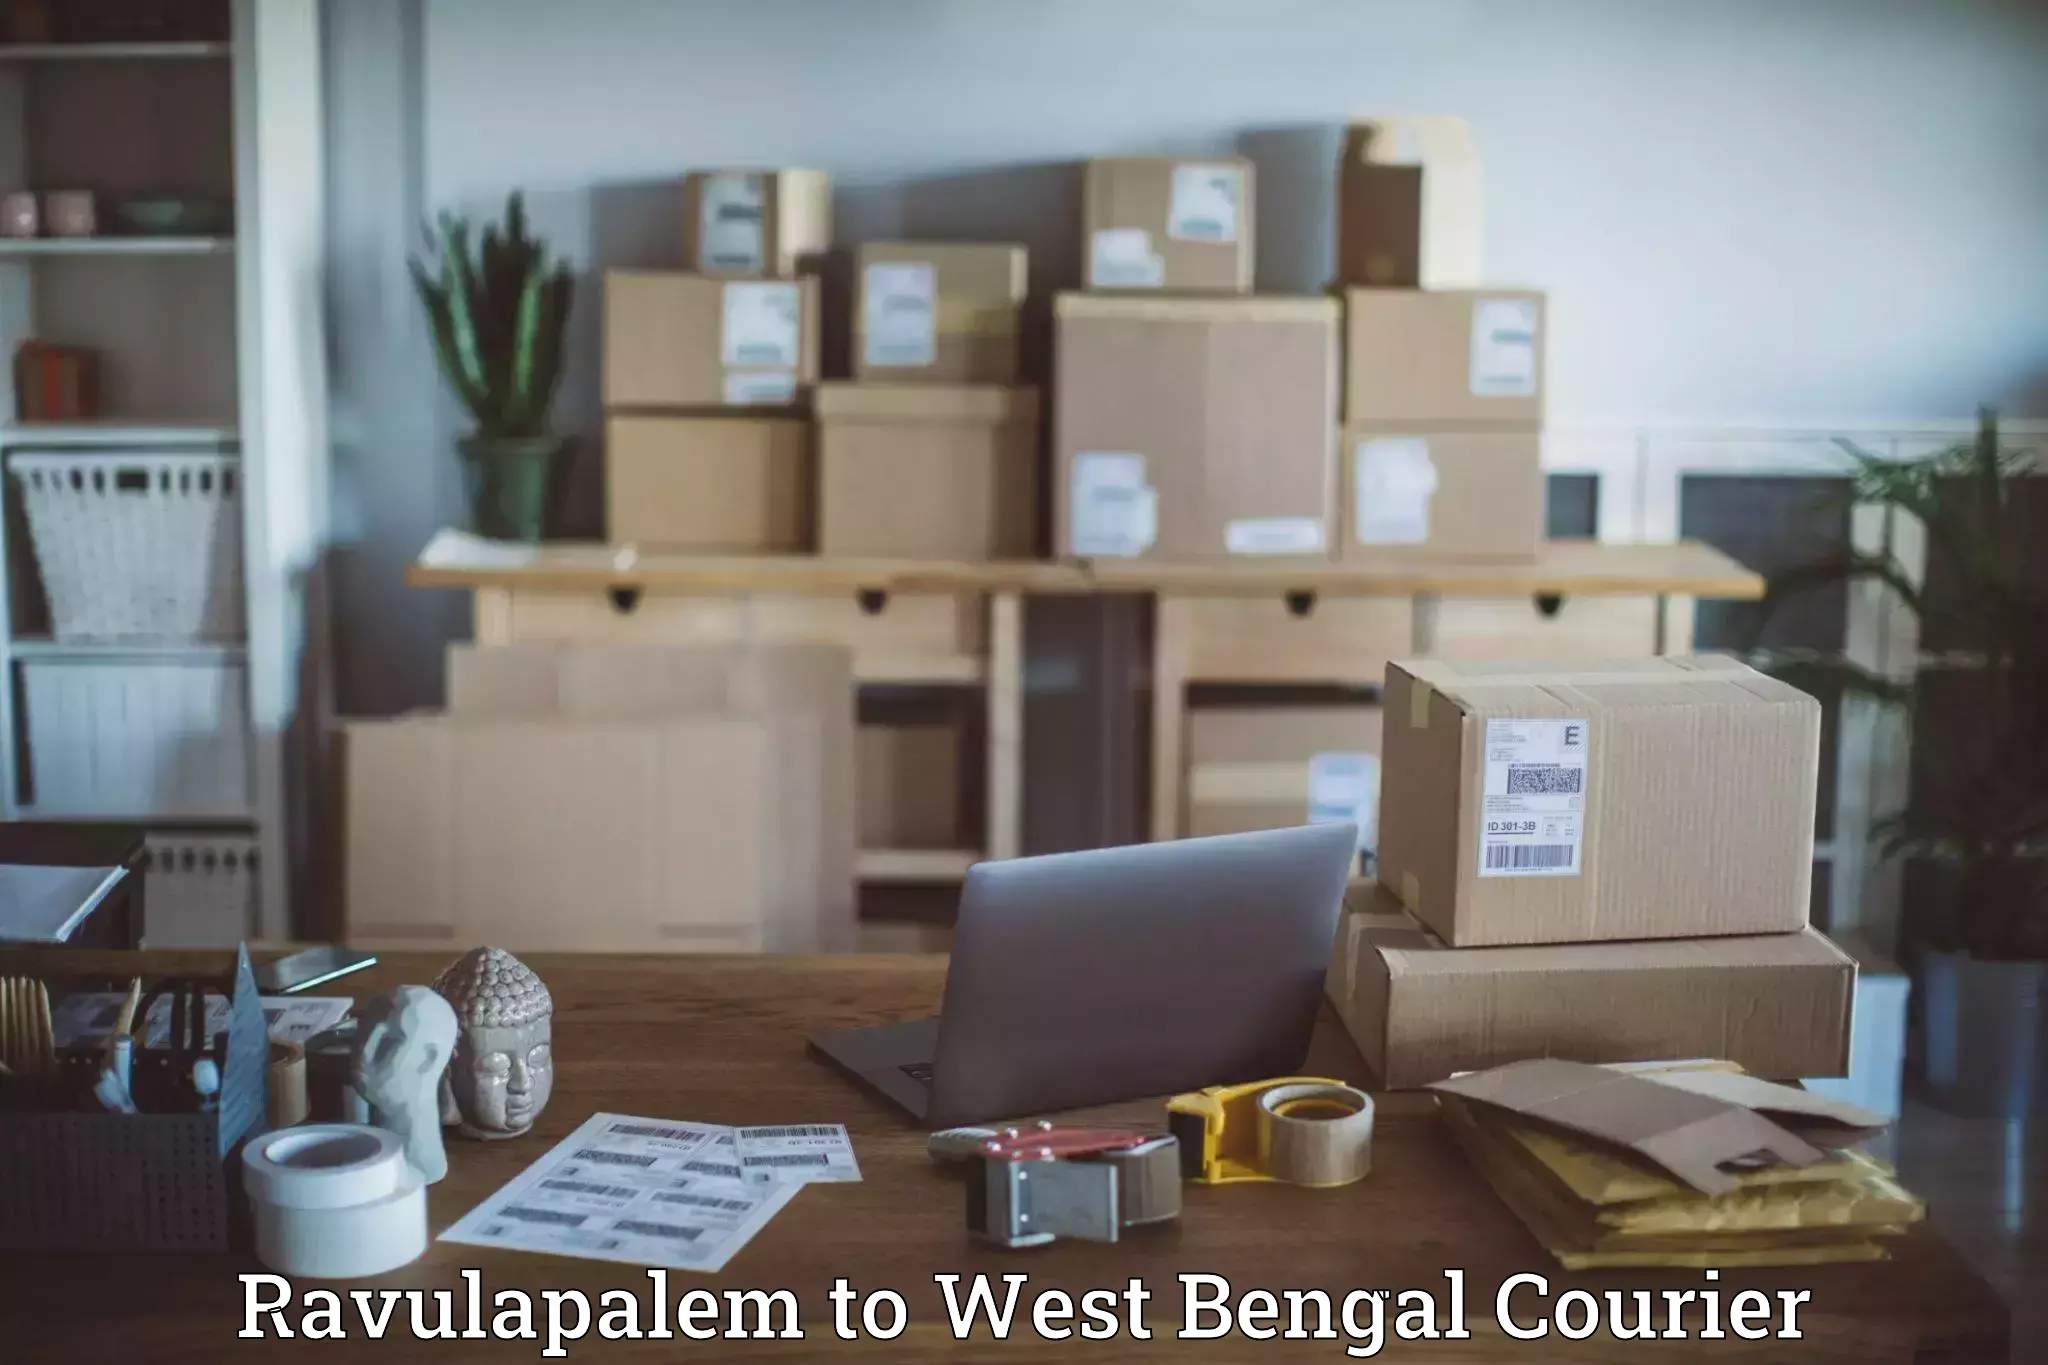 State-of-the-art courier technology Ravulapalem to Hooghly